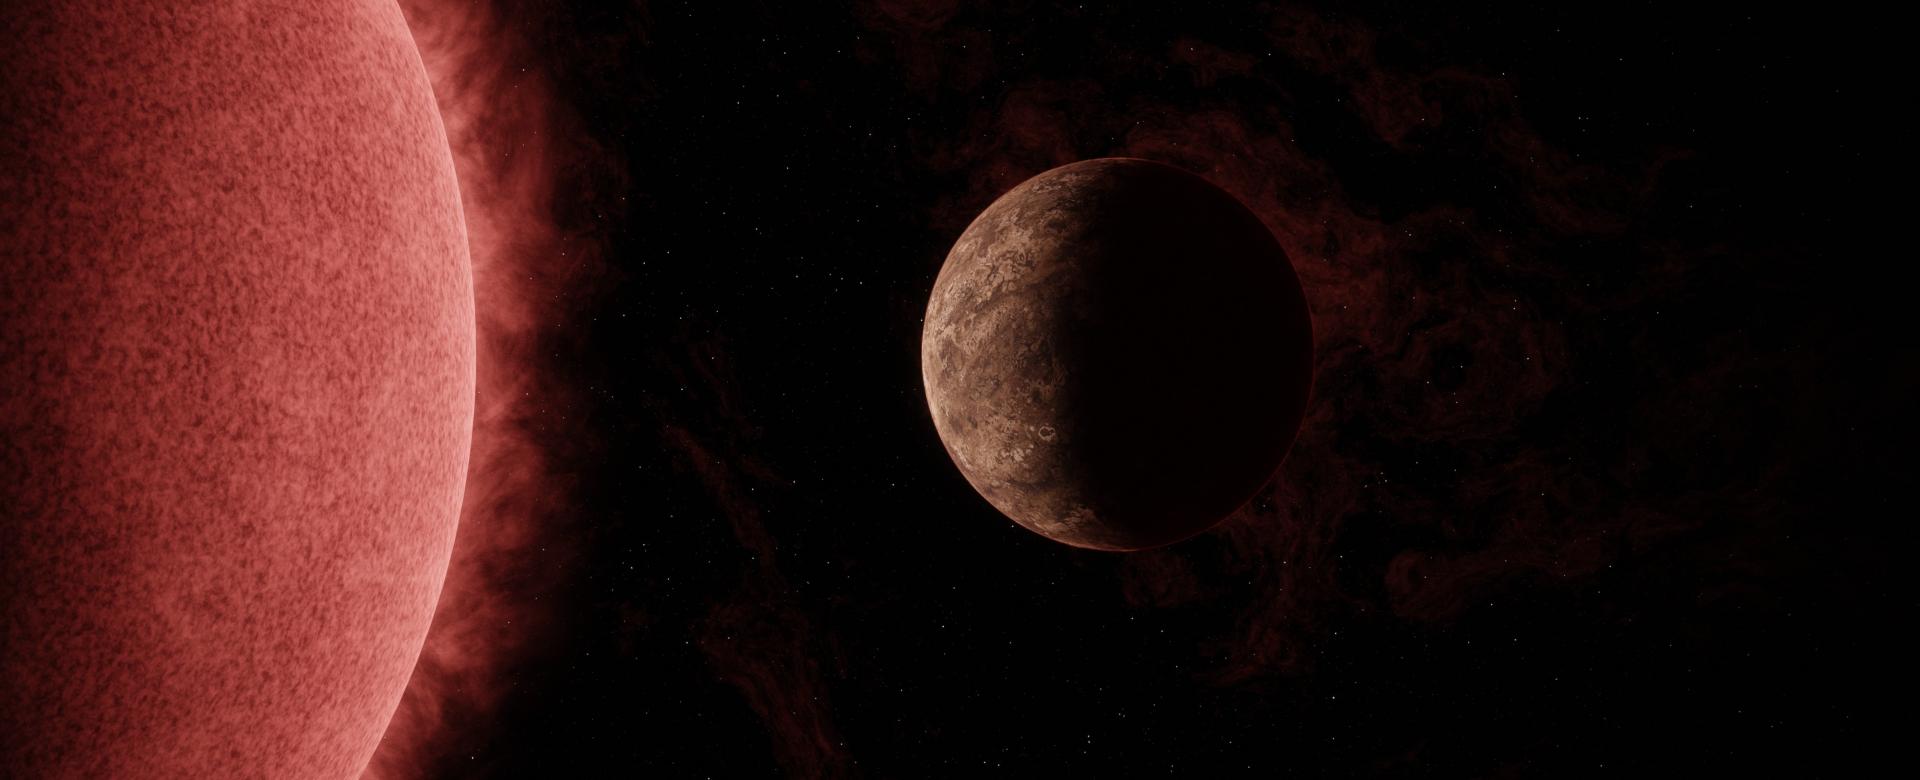 An artist’s concept of the exoplanet SPECULOOS-3 b orbiting its red dwarf star. The planet is as big around as Earth, while its star is slightly bigger than Jupiter – but much more massive. Credit: NASA/JPL-Caltech